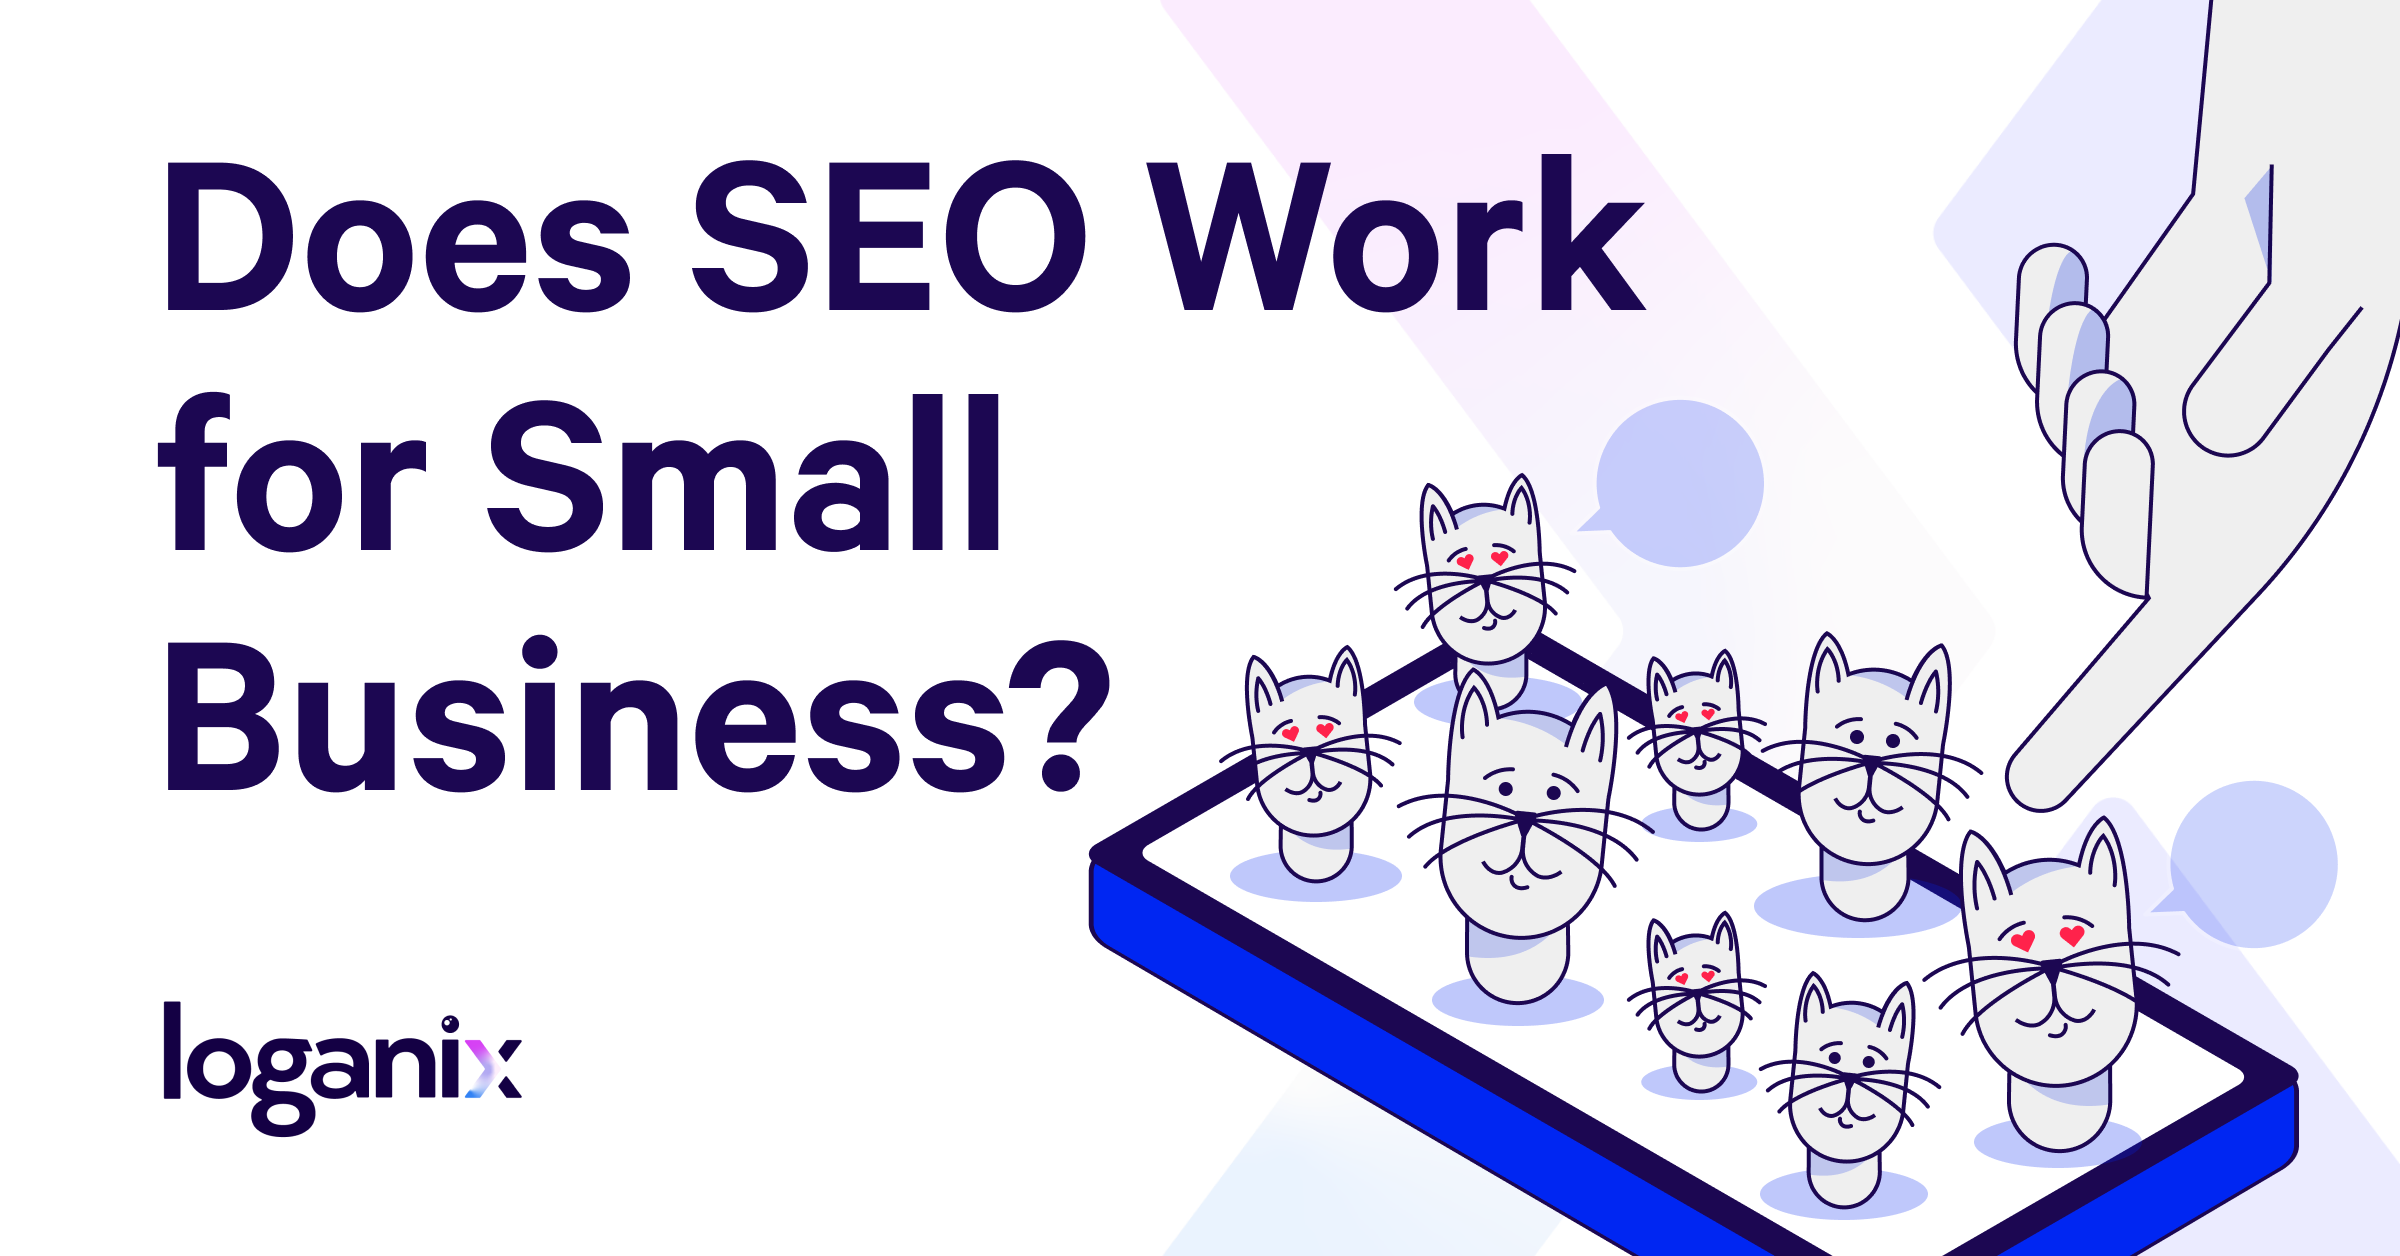 Does SEO Work for Small Business?